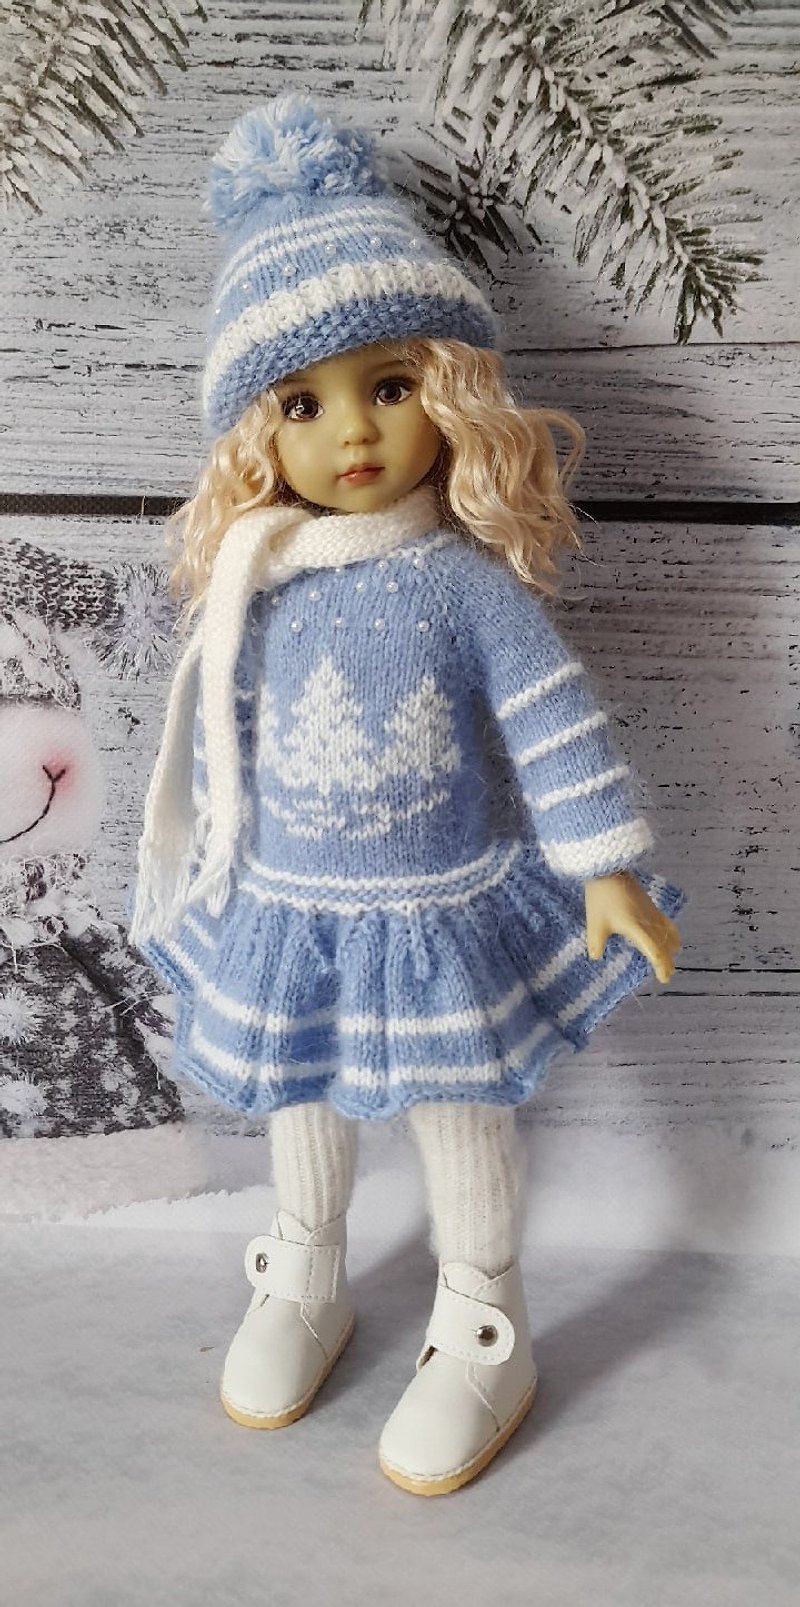 OOAK OUTFIT FOR DOLLS Little Darlings Effner 13,Paola Reina - Stuffed Dolls & Figurines - Wool White